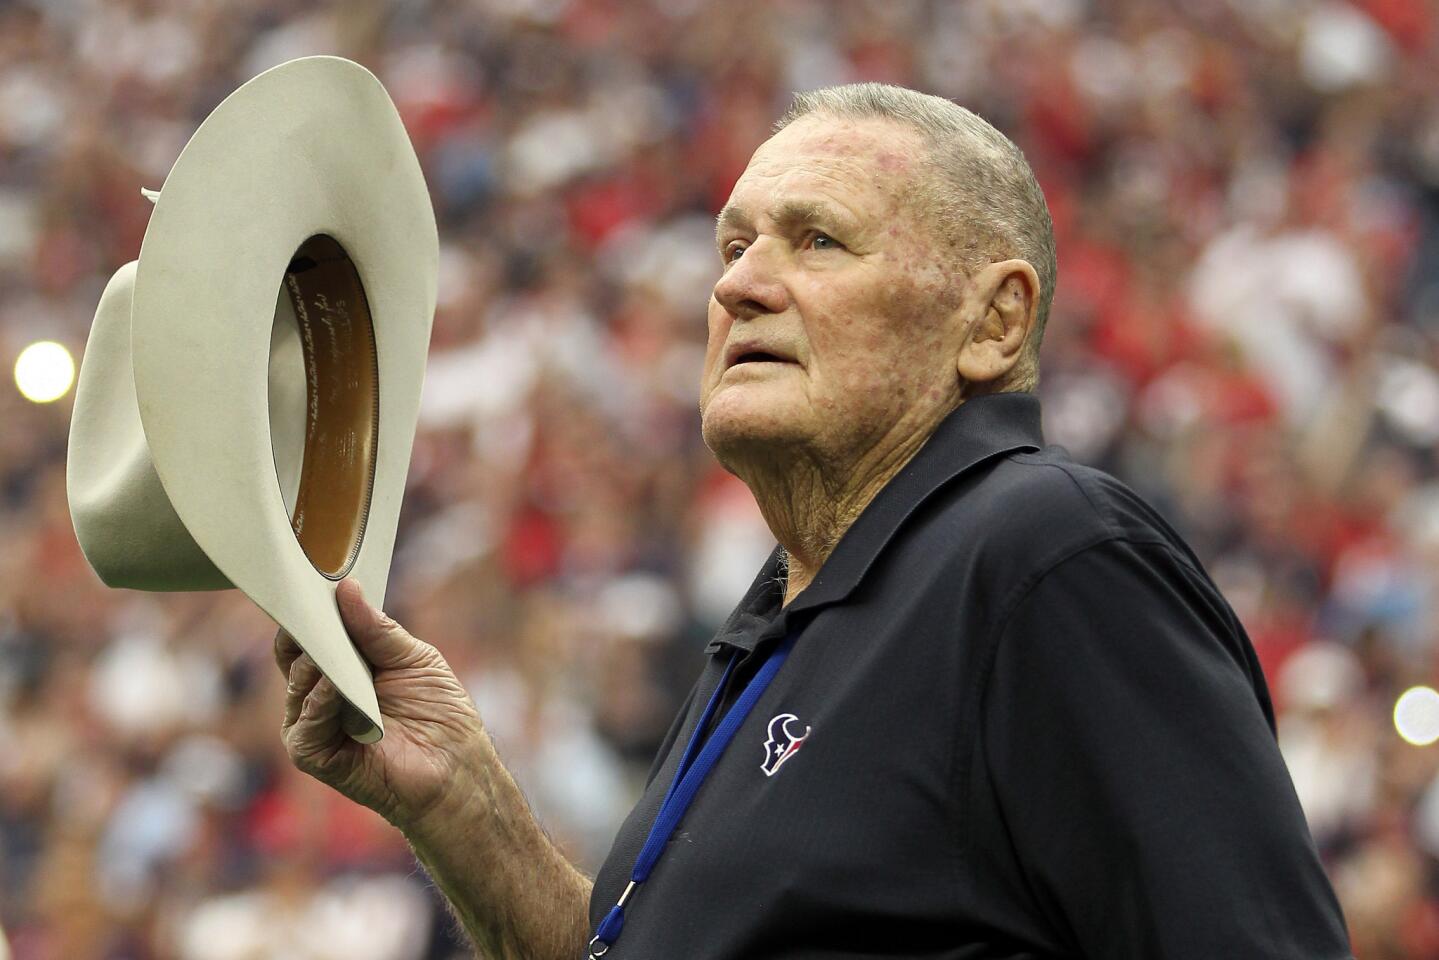 Oail Andrew "Bum" Phillips was the former coach of the Houston Oilers from 1975-1980. He turned the losing team around before coaching the New Orleans Saints. He passed away October 18, 2013 at age 90.